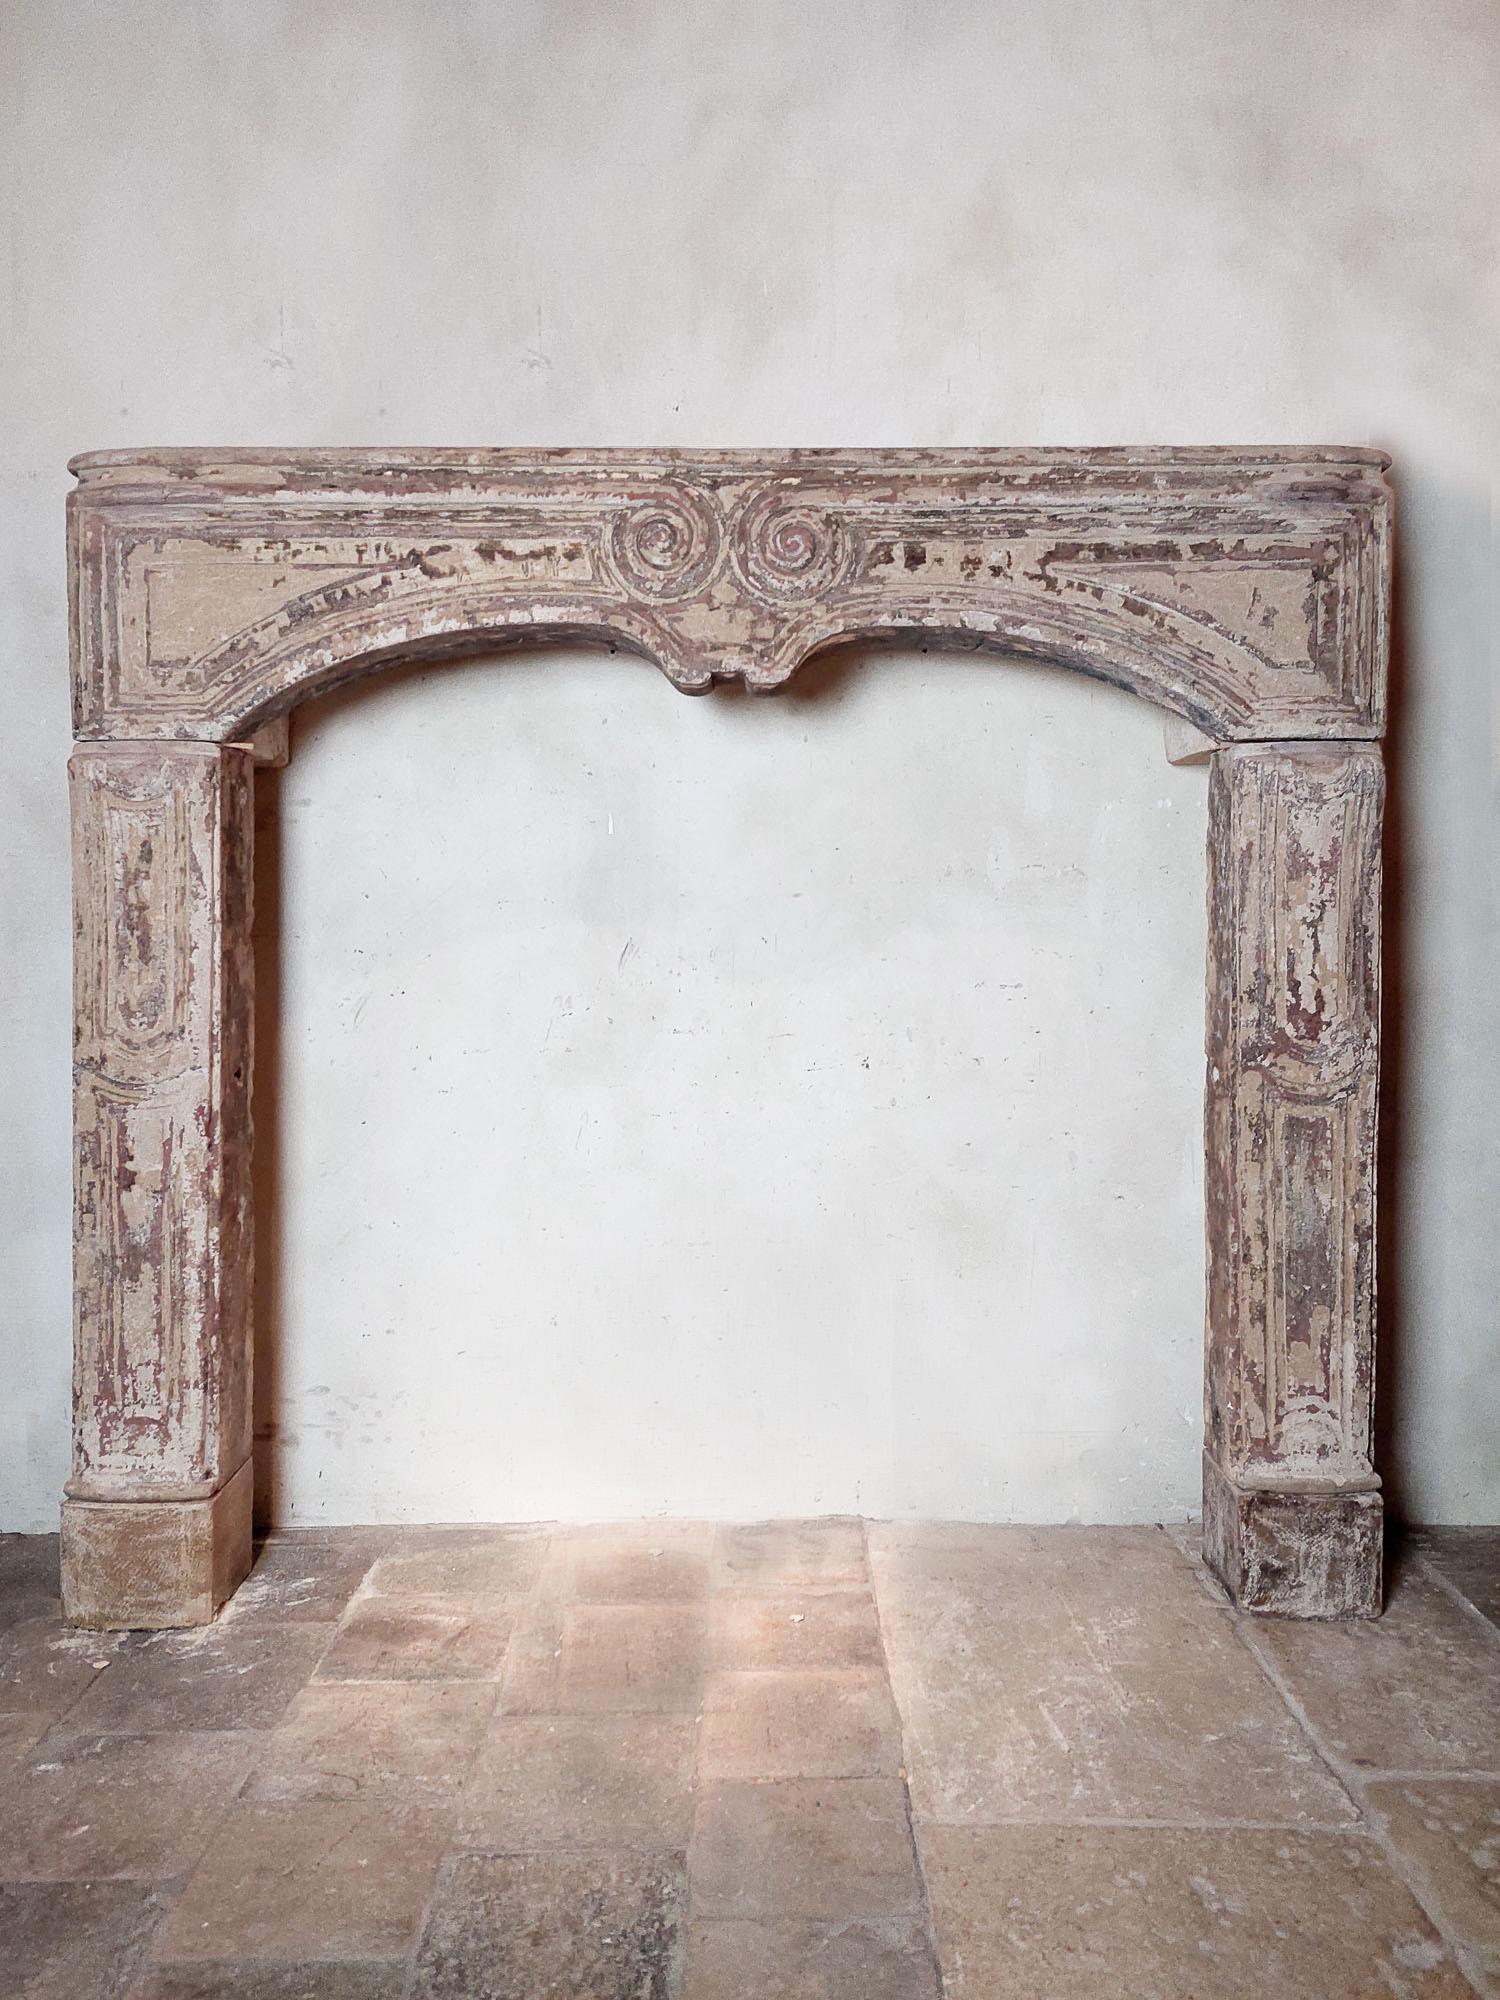 Antique sandstone Baroque mantelpiece from the 18th century. This large Louis XIV mantelpiece has beautiful patina remains in pink and beige powder color tones.

Dimensions: ± h 133 x w 149 x d 29 cm
inner dimensions: ± h 113 x 115 cm